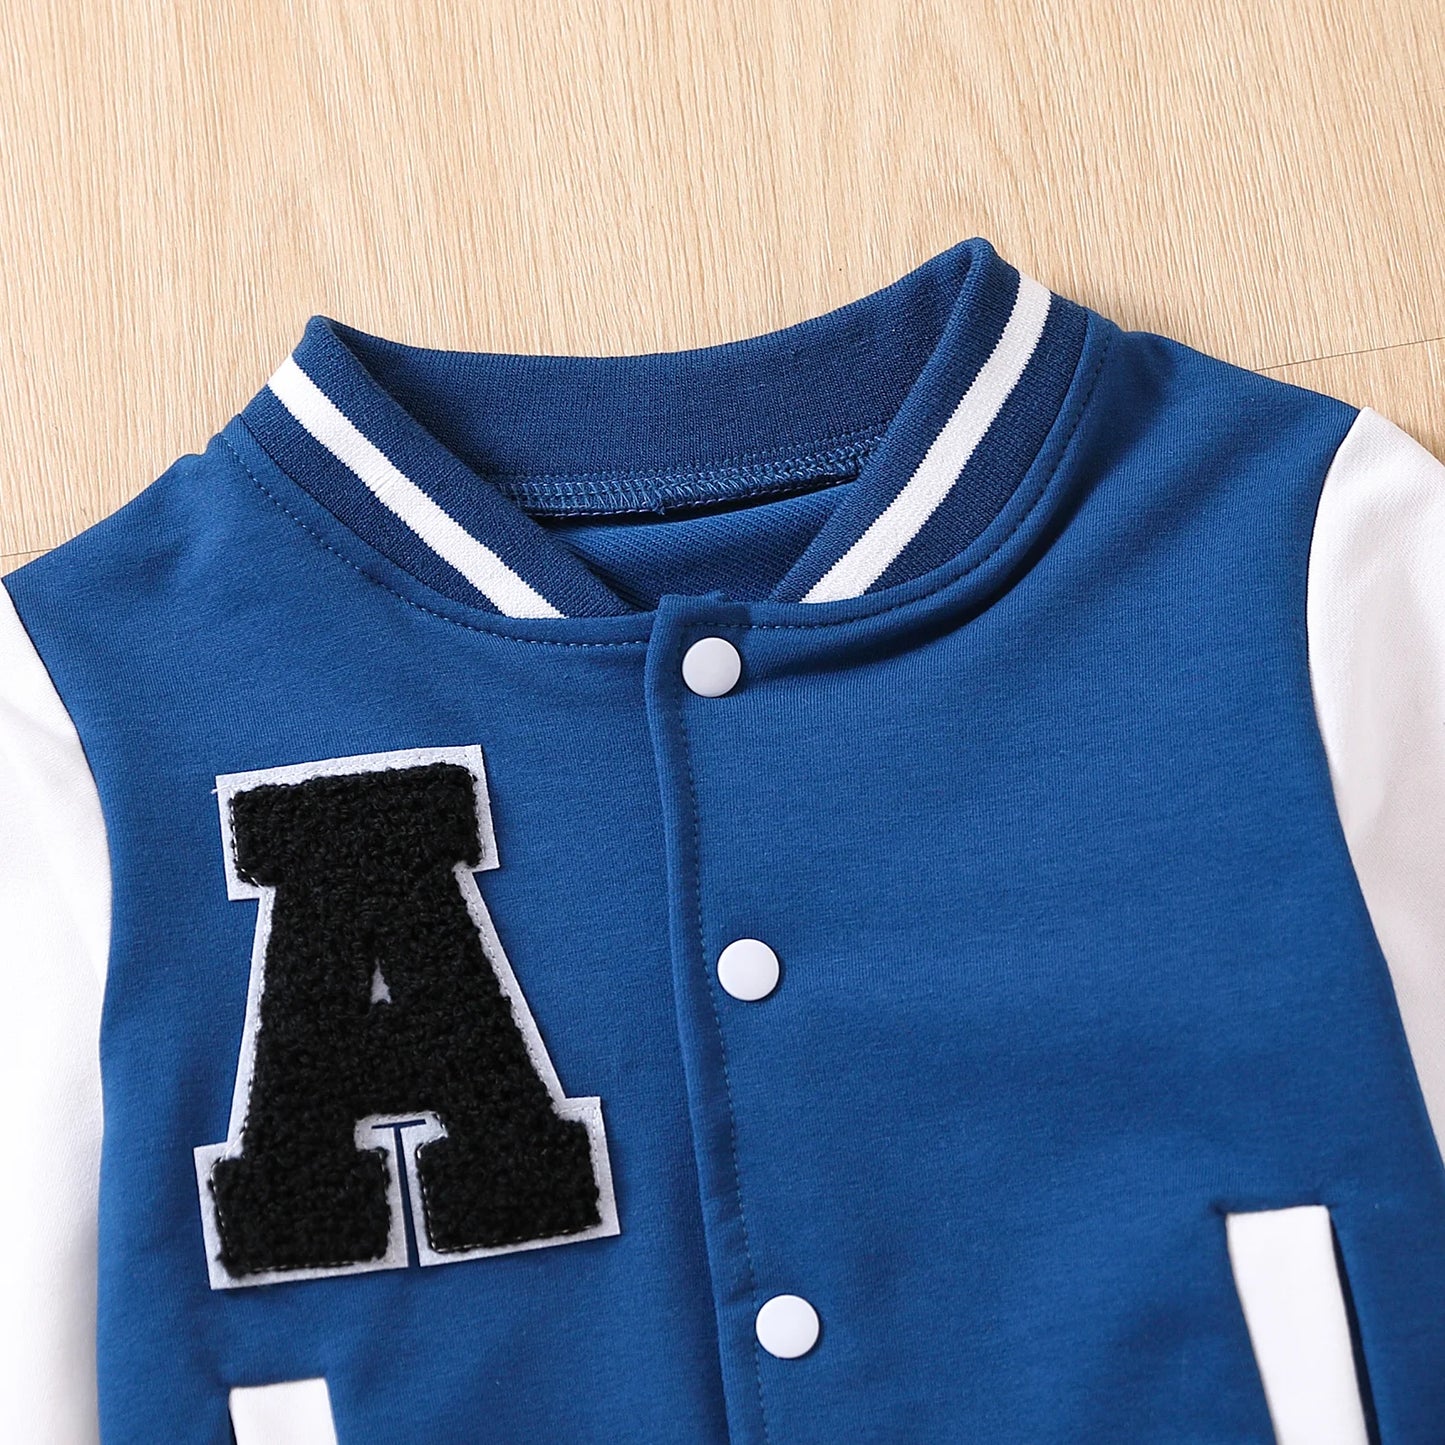 Spring Autumn And Winter Festival Boys And Girls Infant Long Sleeve Letter A Korean Casual Jacket